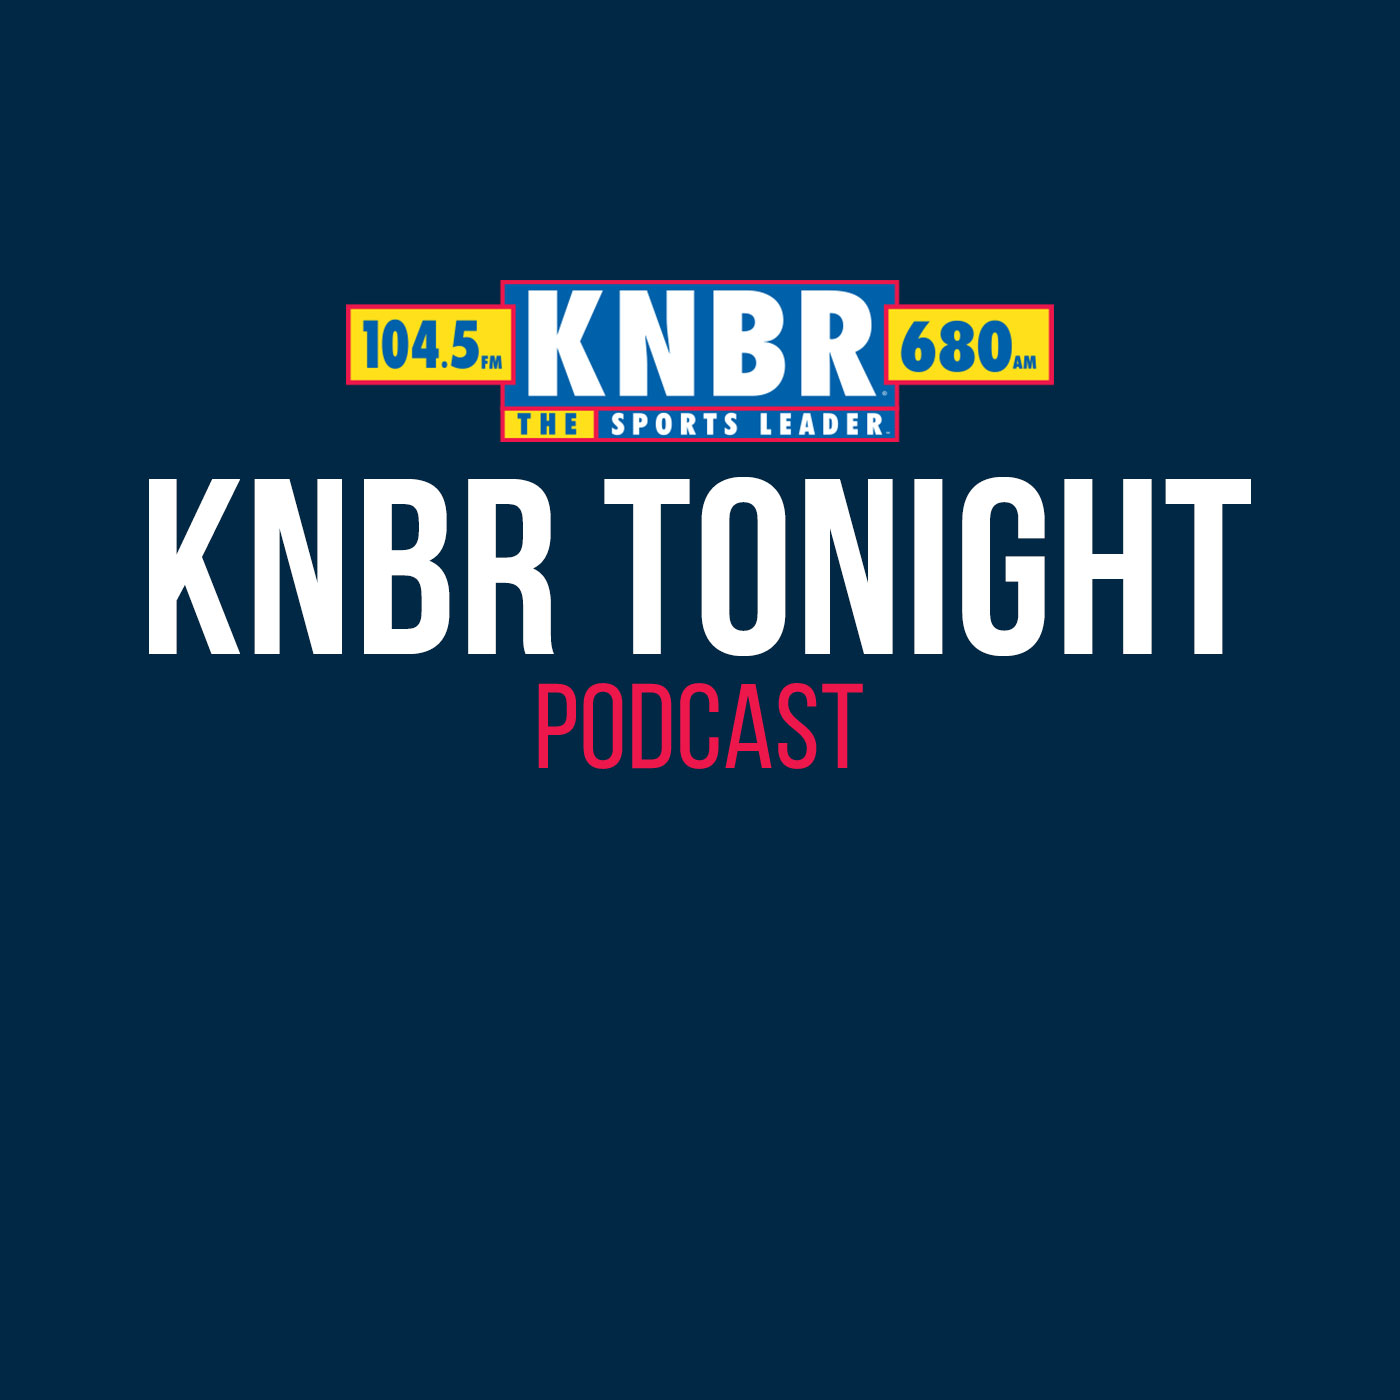 11-30 Festus Ezeli joins KNBR Tonight with Dieter Kurtenbach to talk about Steph being a leader & why he doesnt agree that the big man doesn't exist in today's NBA